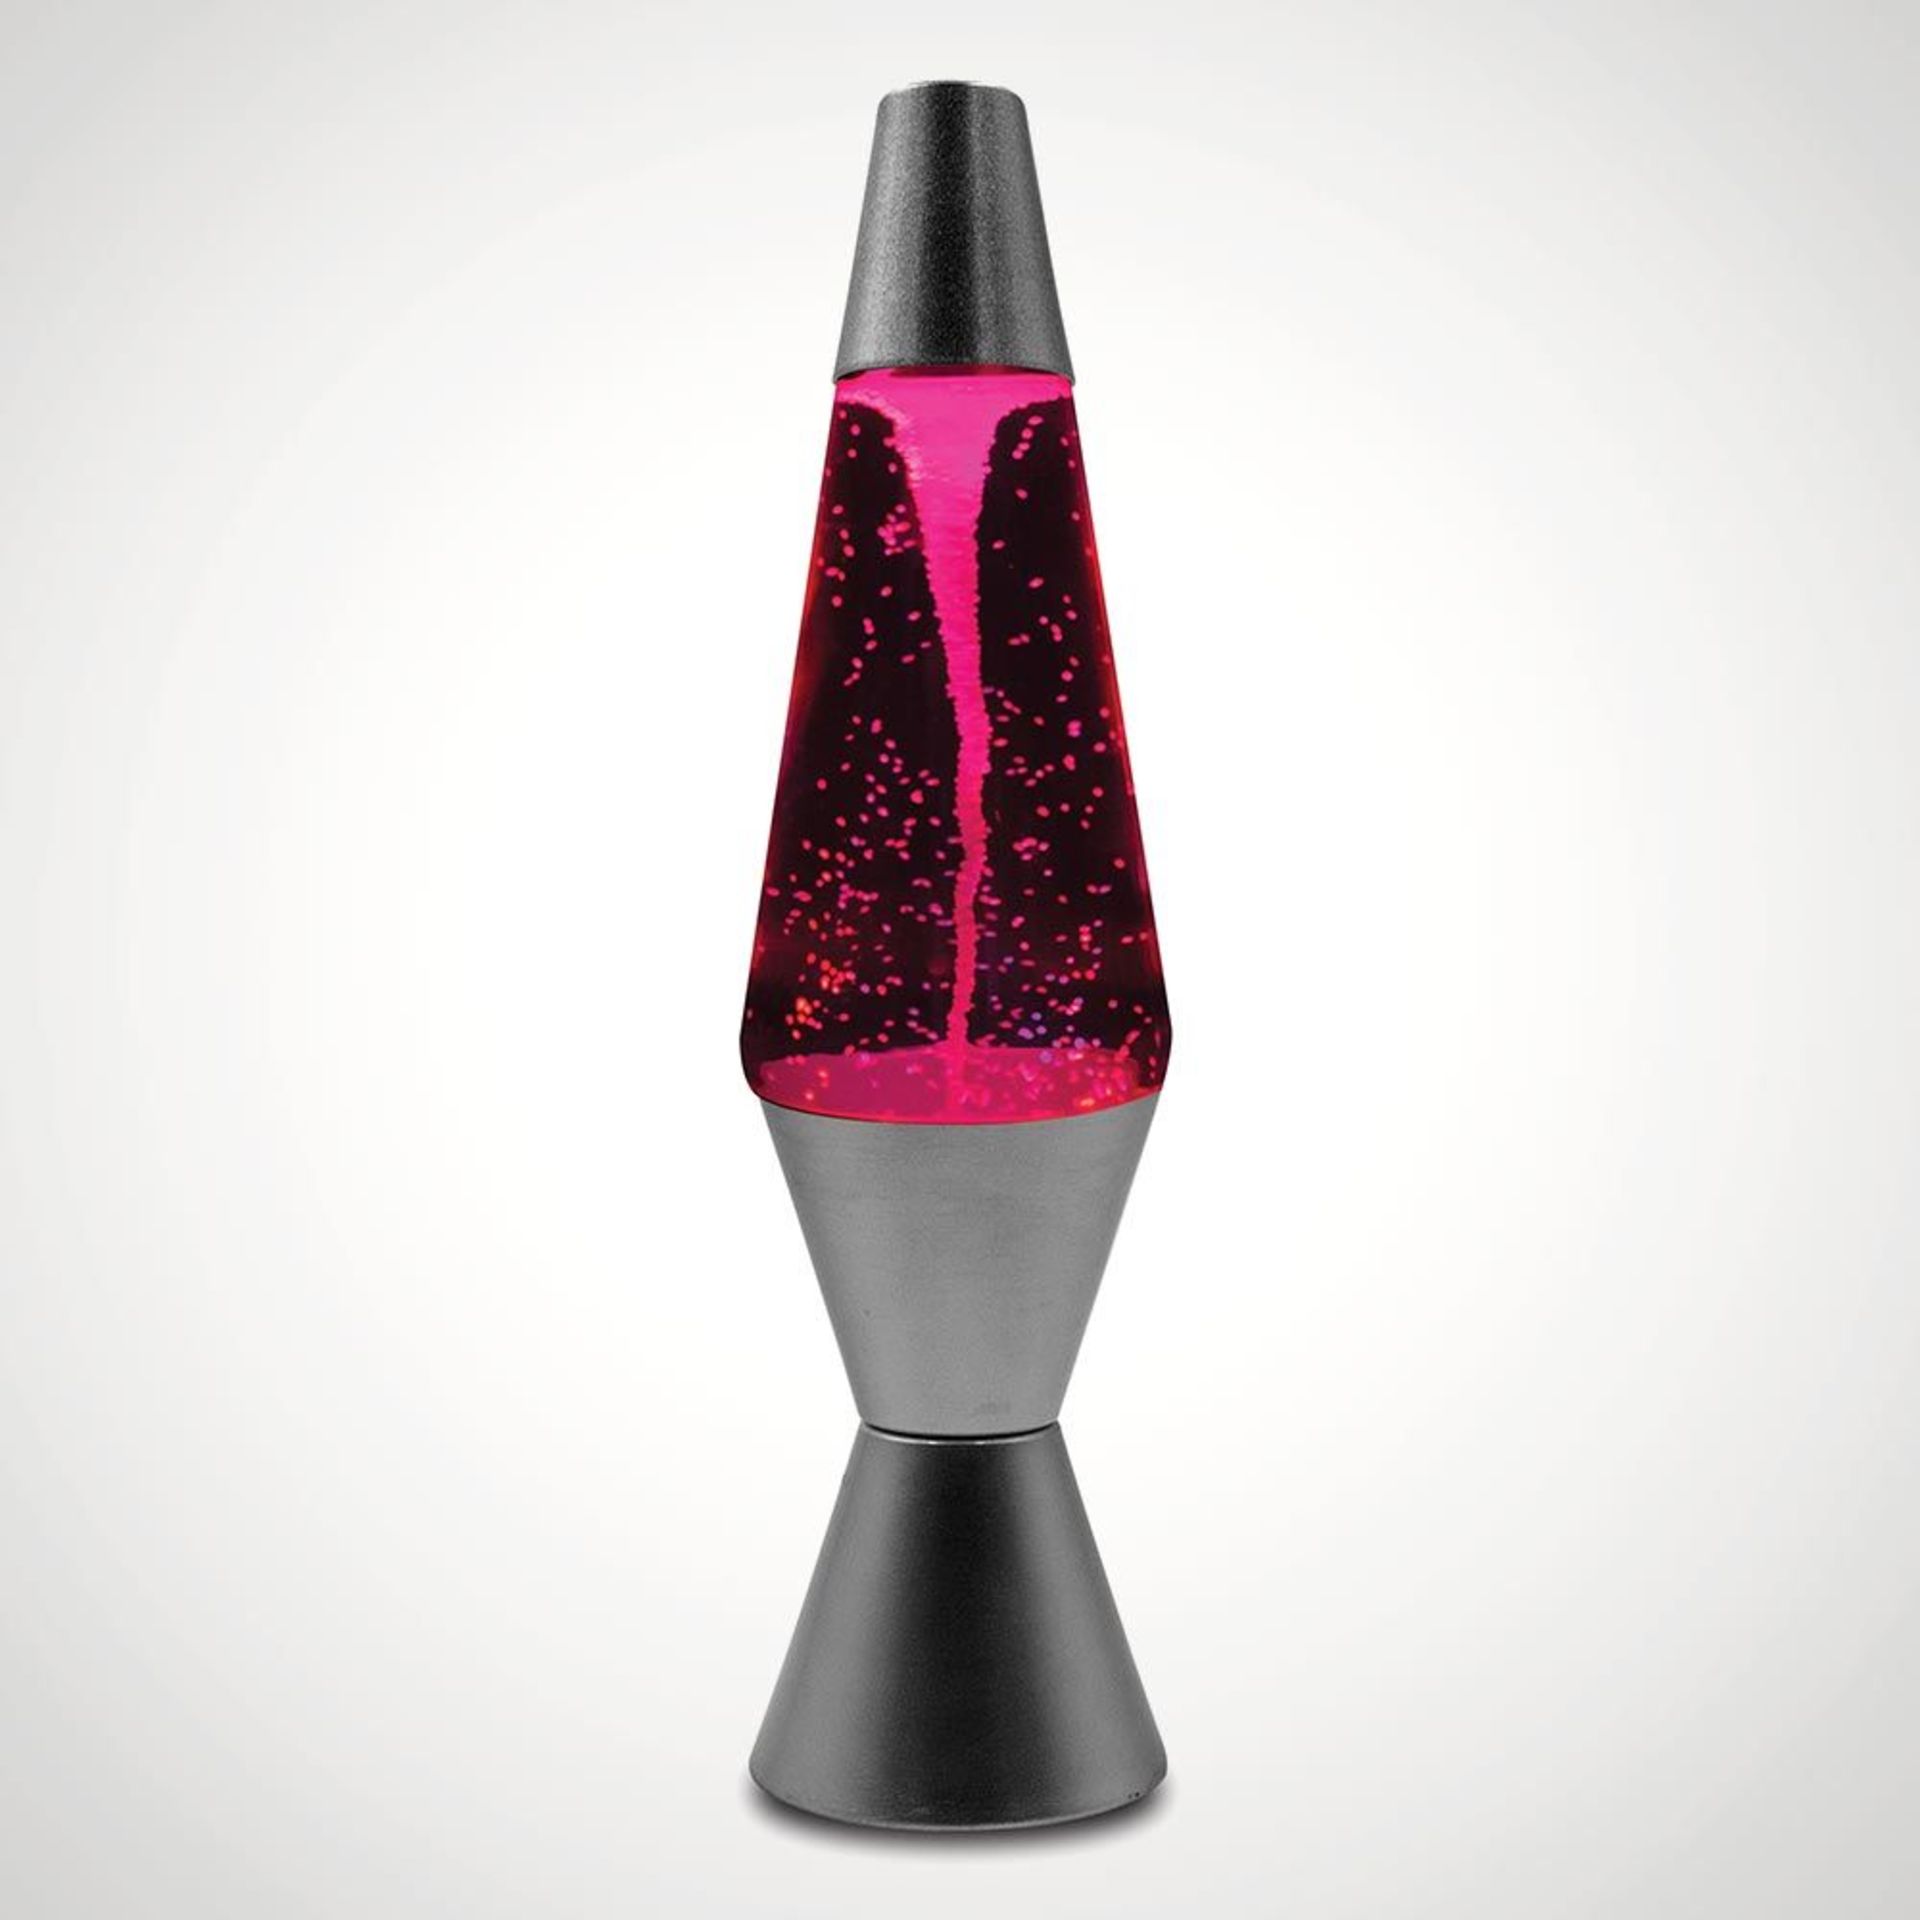 7x Red5 Colour Changing Twister Lamp RRP £19.99 Each. (Units Have Return To Manufacturer Sticker). - Image 2 of 3